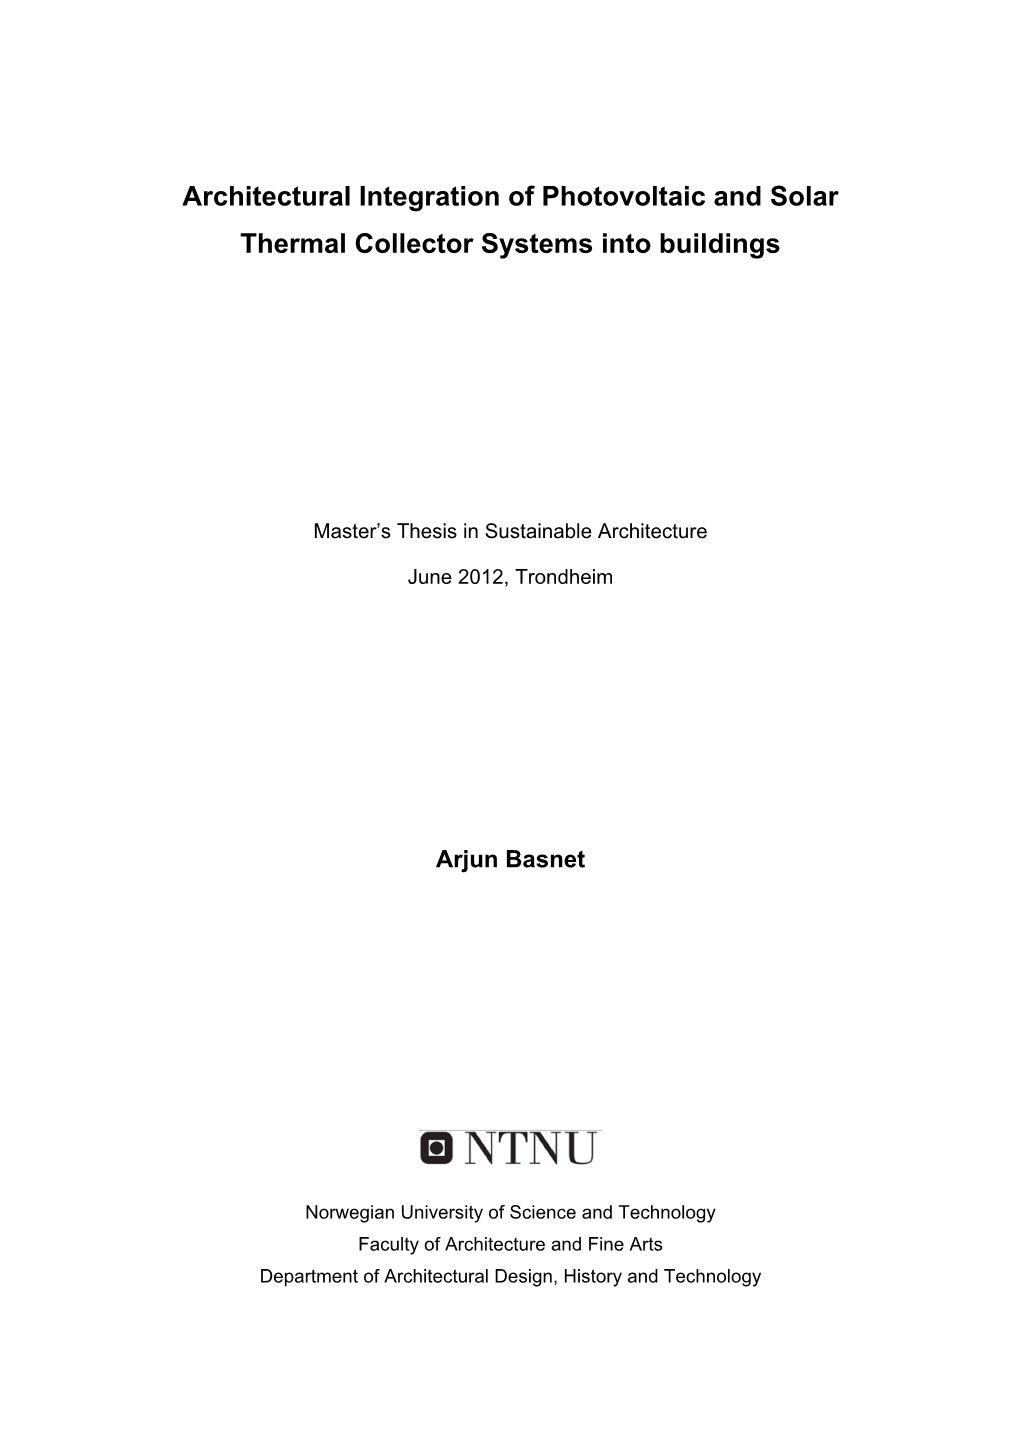 Architectural Integration of Photovoltaic and Solar Thermal Collector Systems Into Buildings